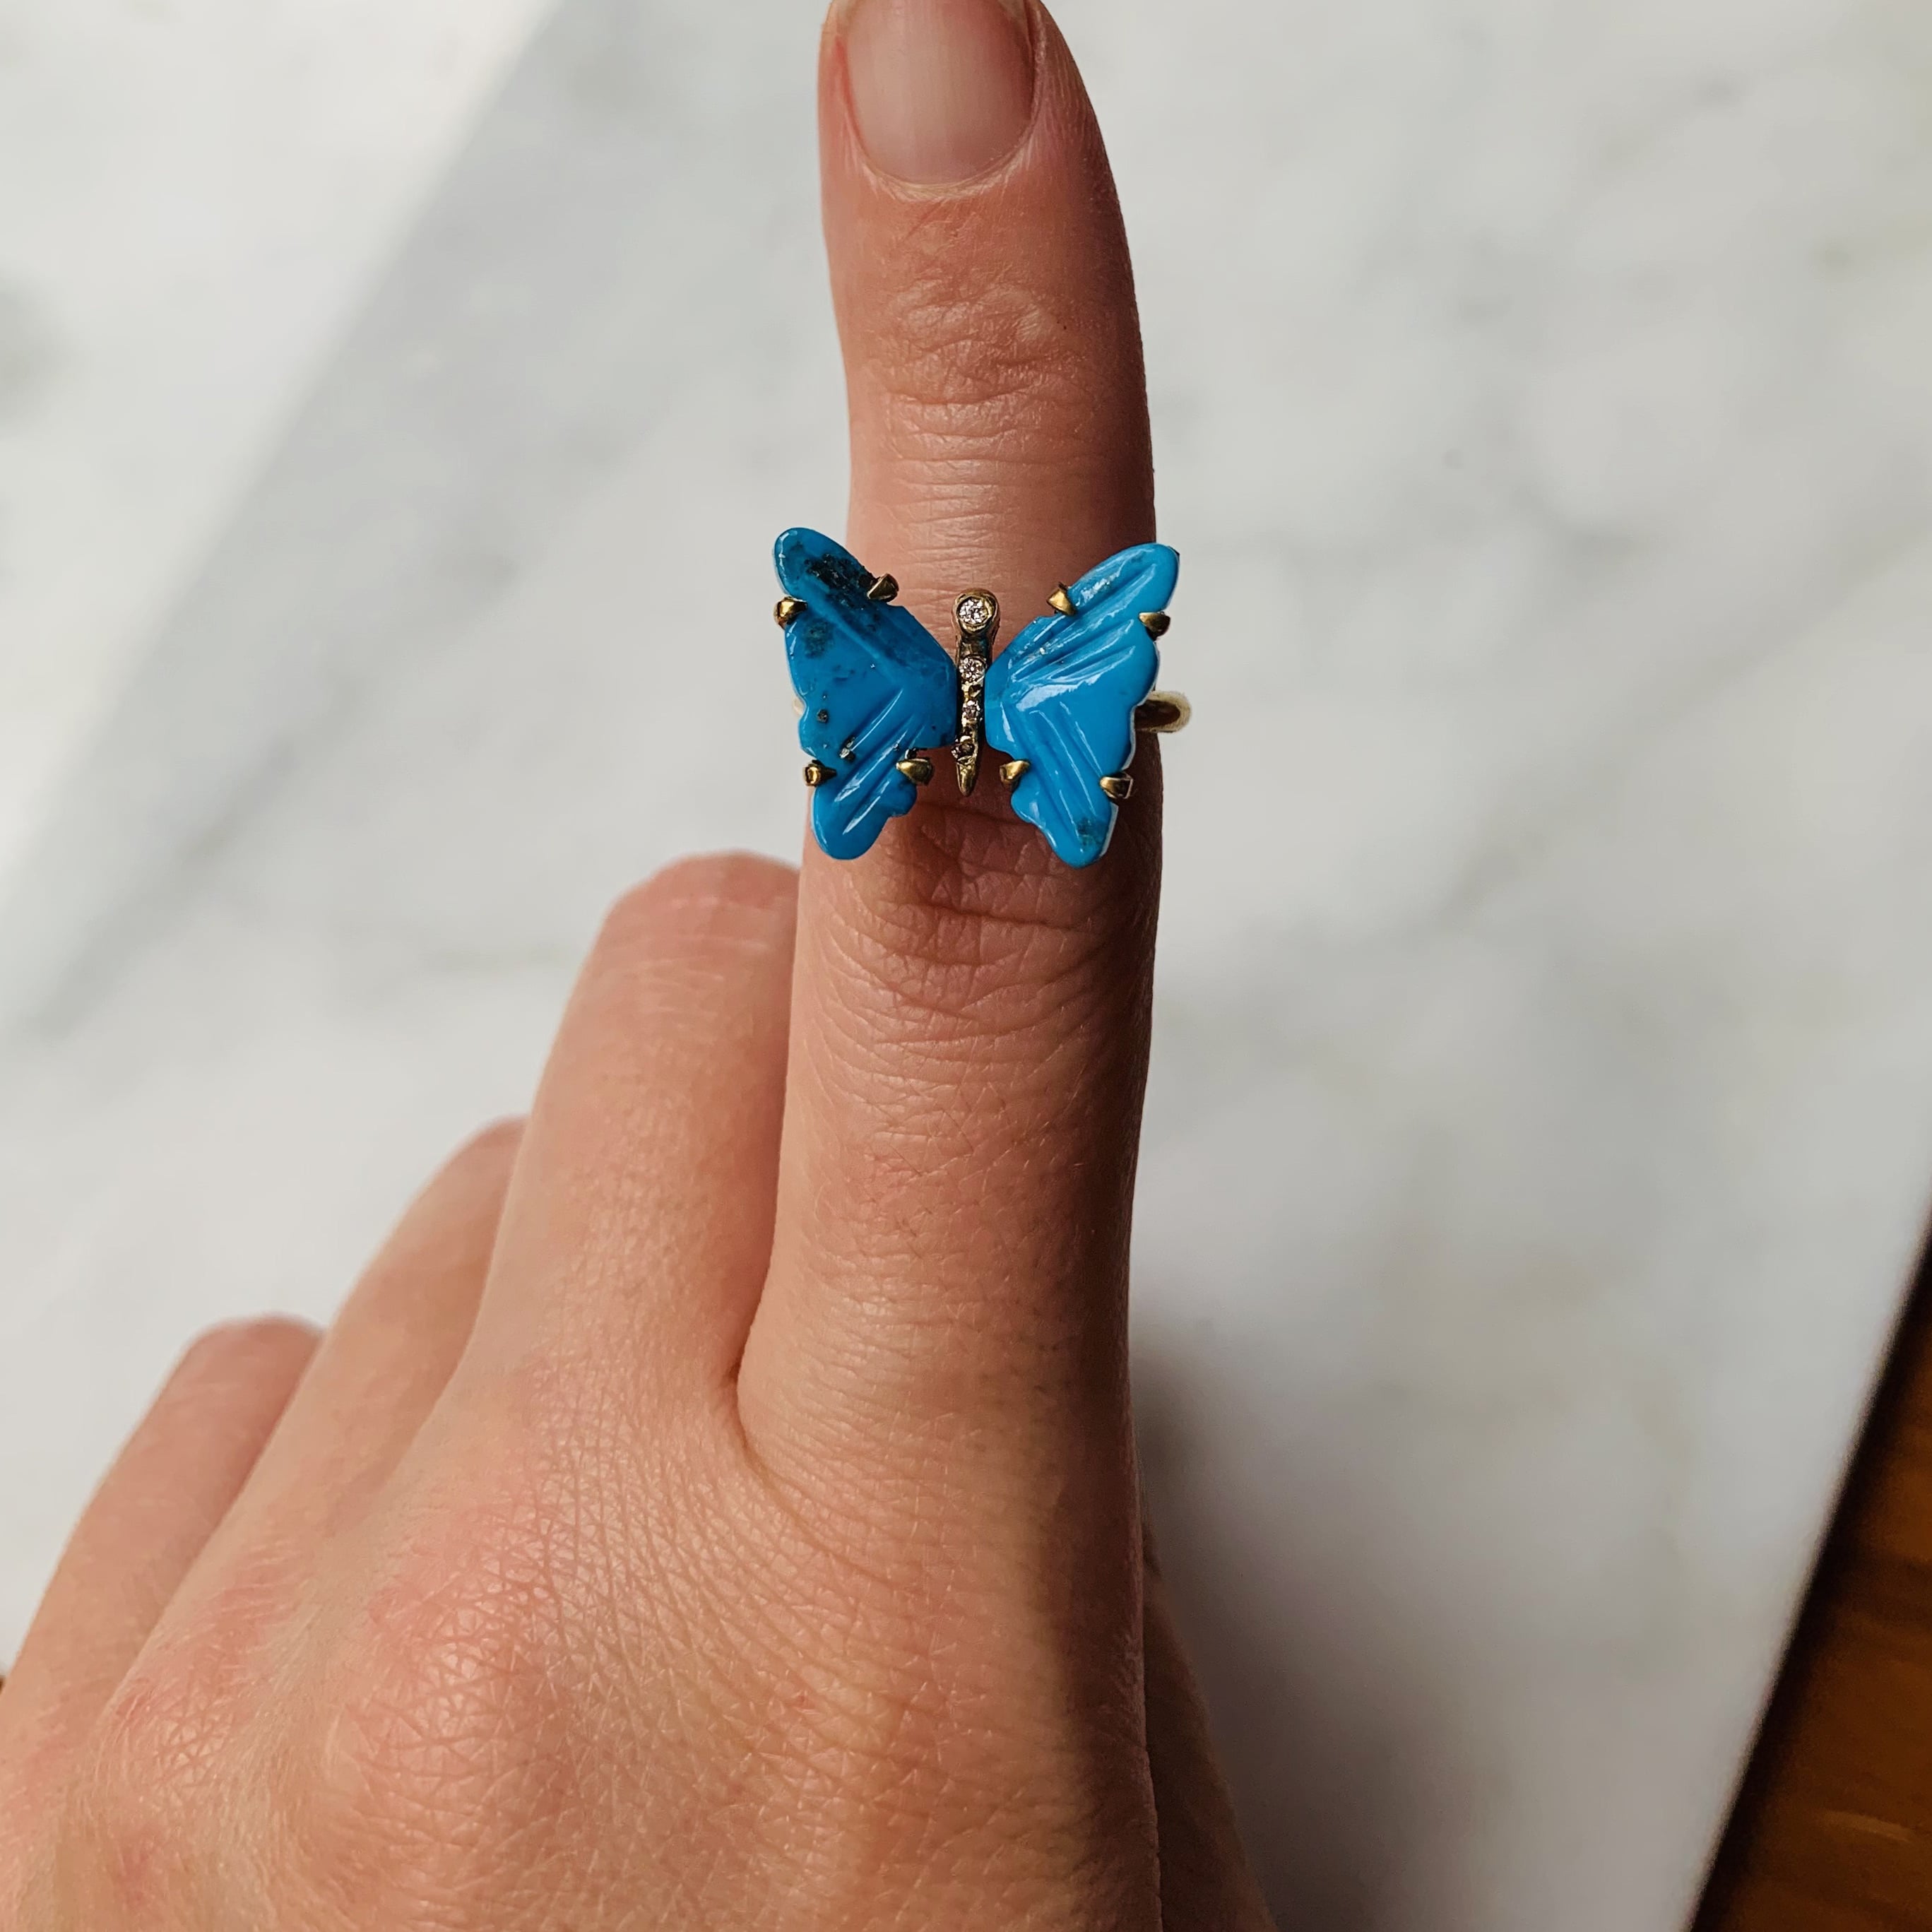 Turquoise and Diamond Butterfly Ring